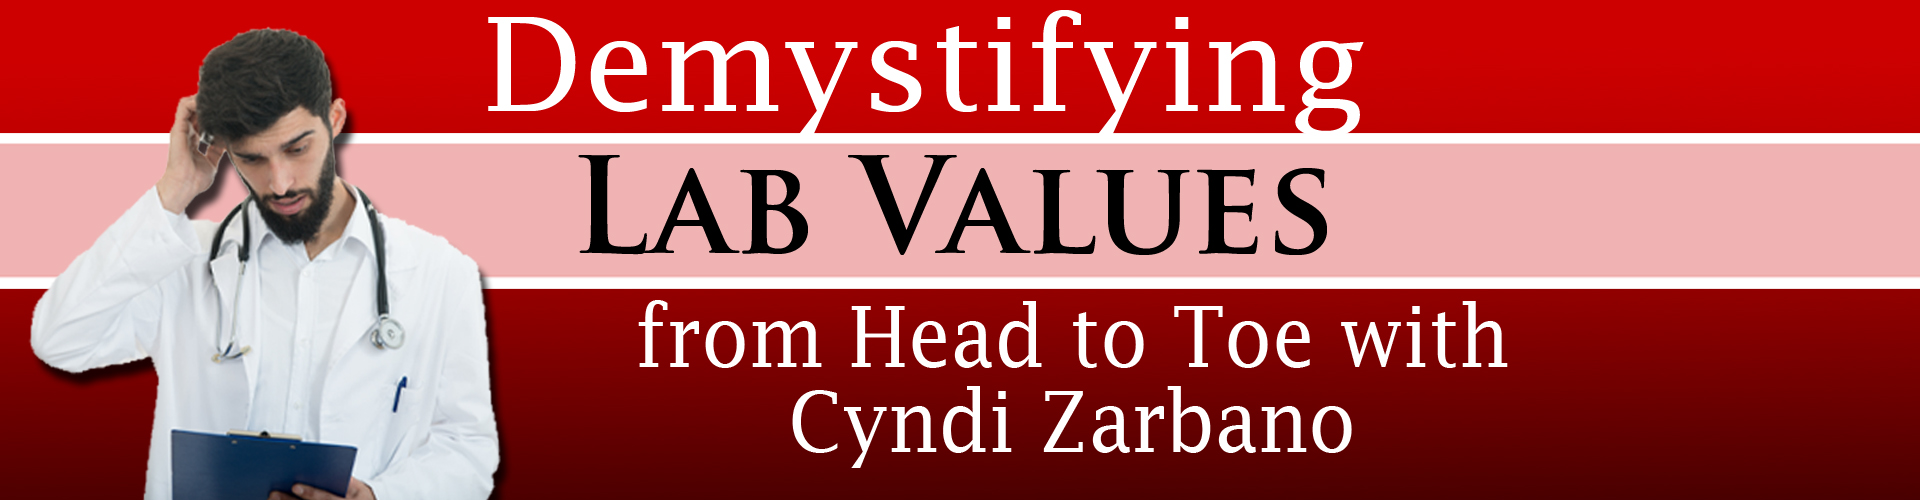 Demystifying Lab Values from Head to Toe with Cyndi Zarbano